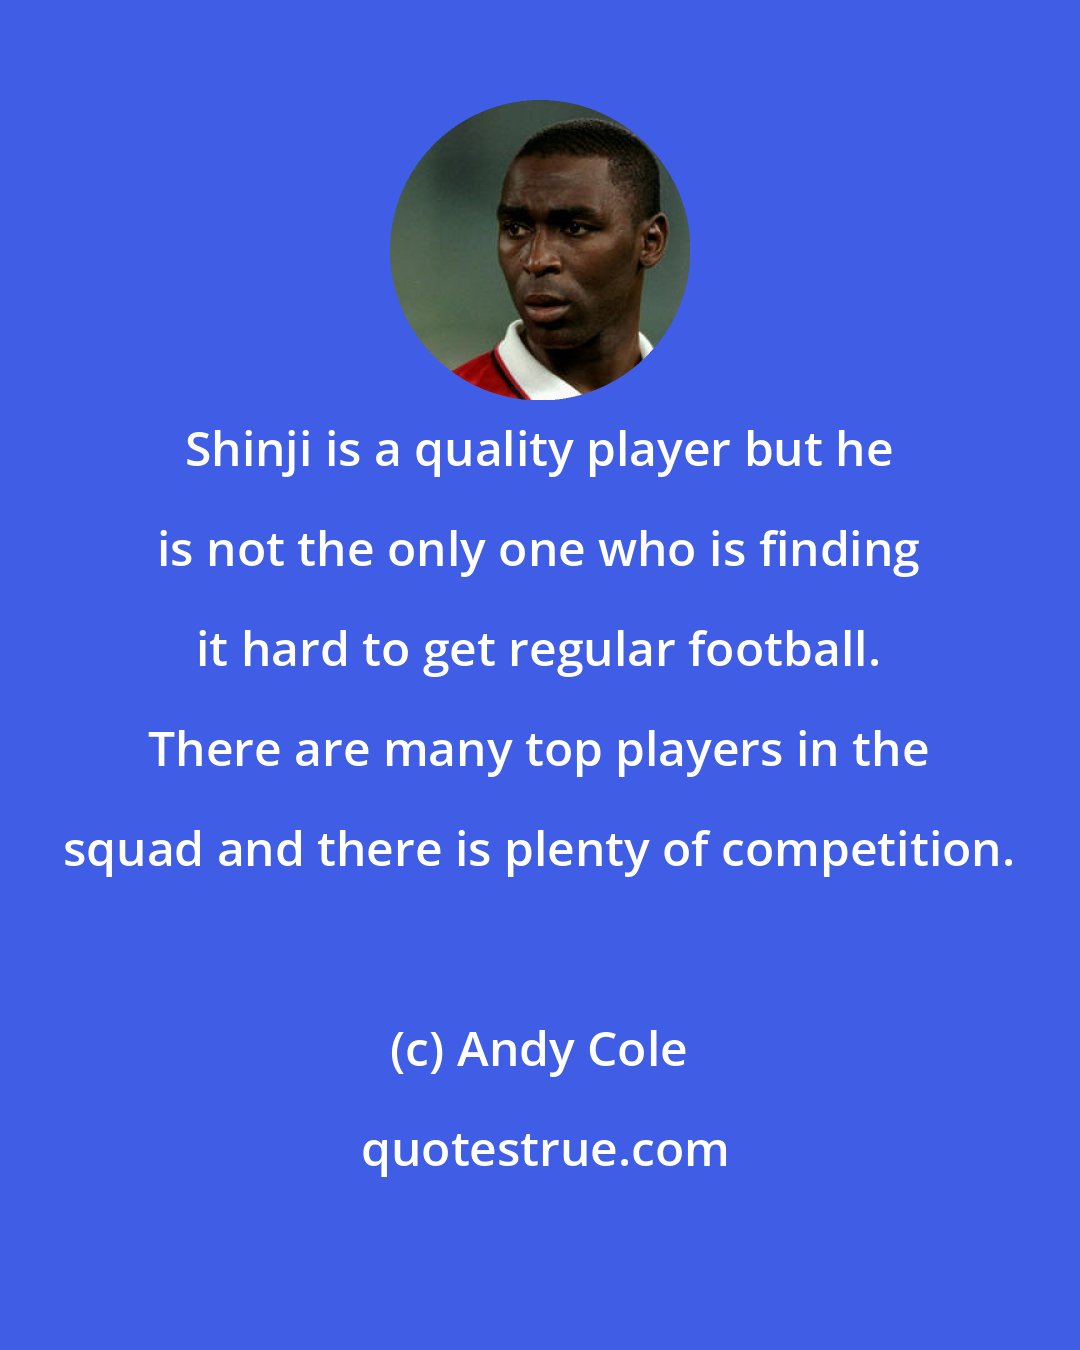 Andy Cole: Shinji is a quality player but he is not the only one who is finding it hard to get regular football. There are many top players in the squad and there is plenty of competition.